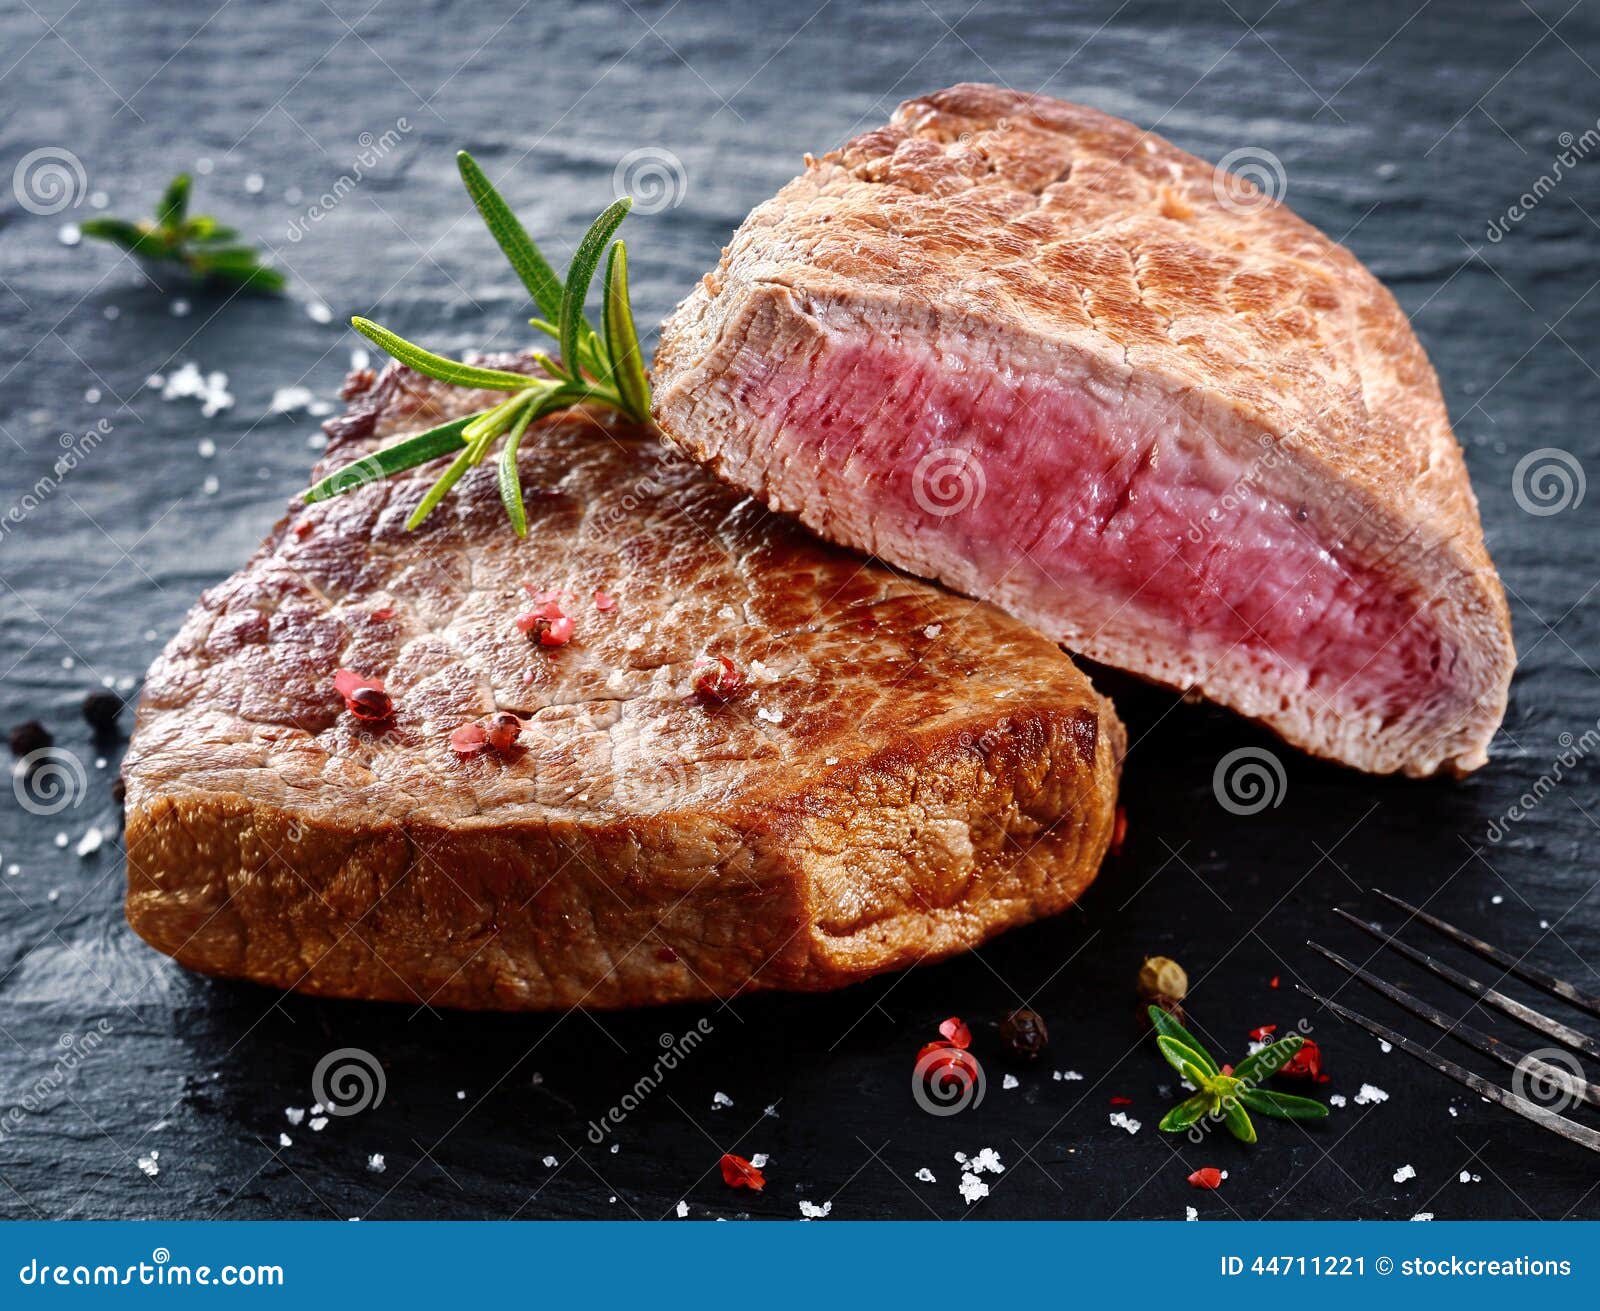 two portions of lean trimmed grilled beef steak